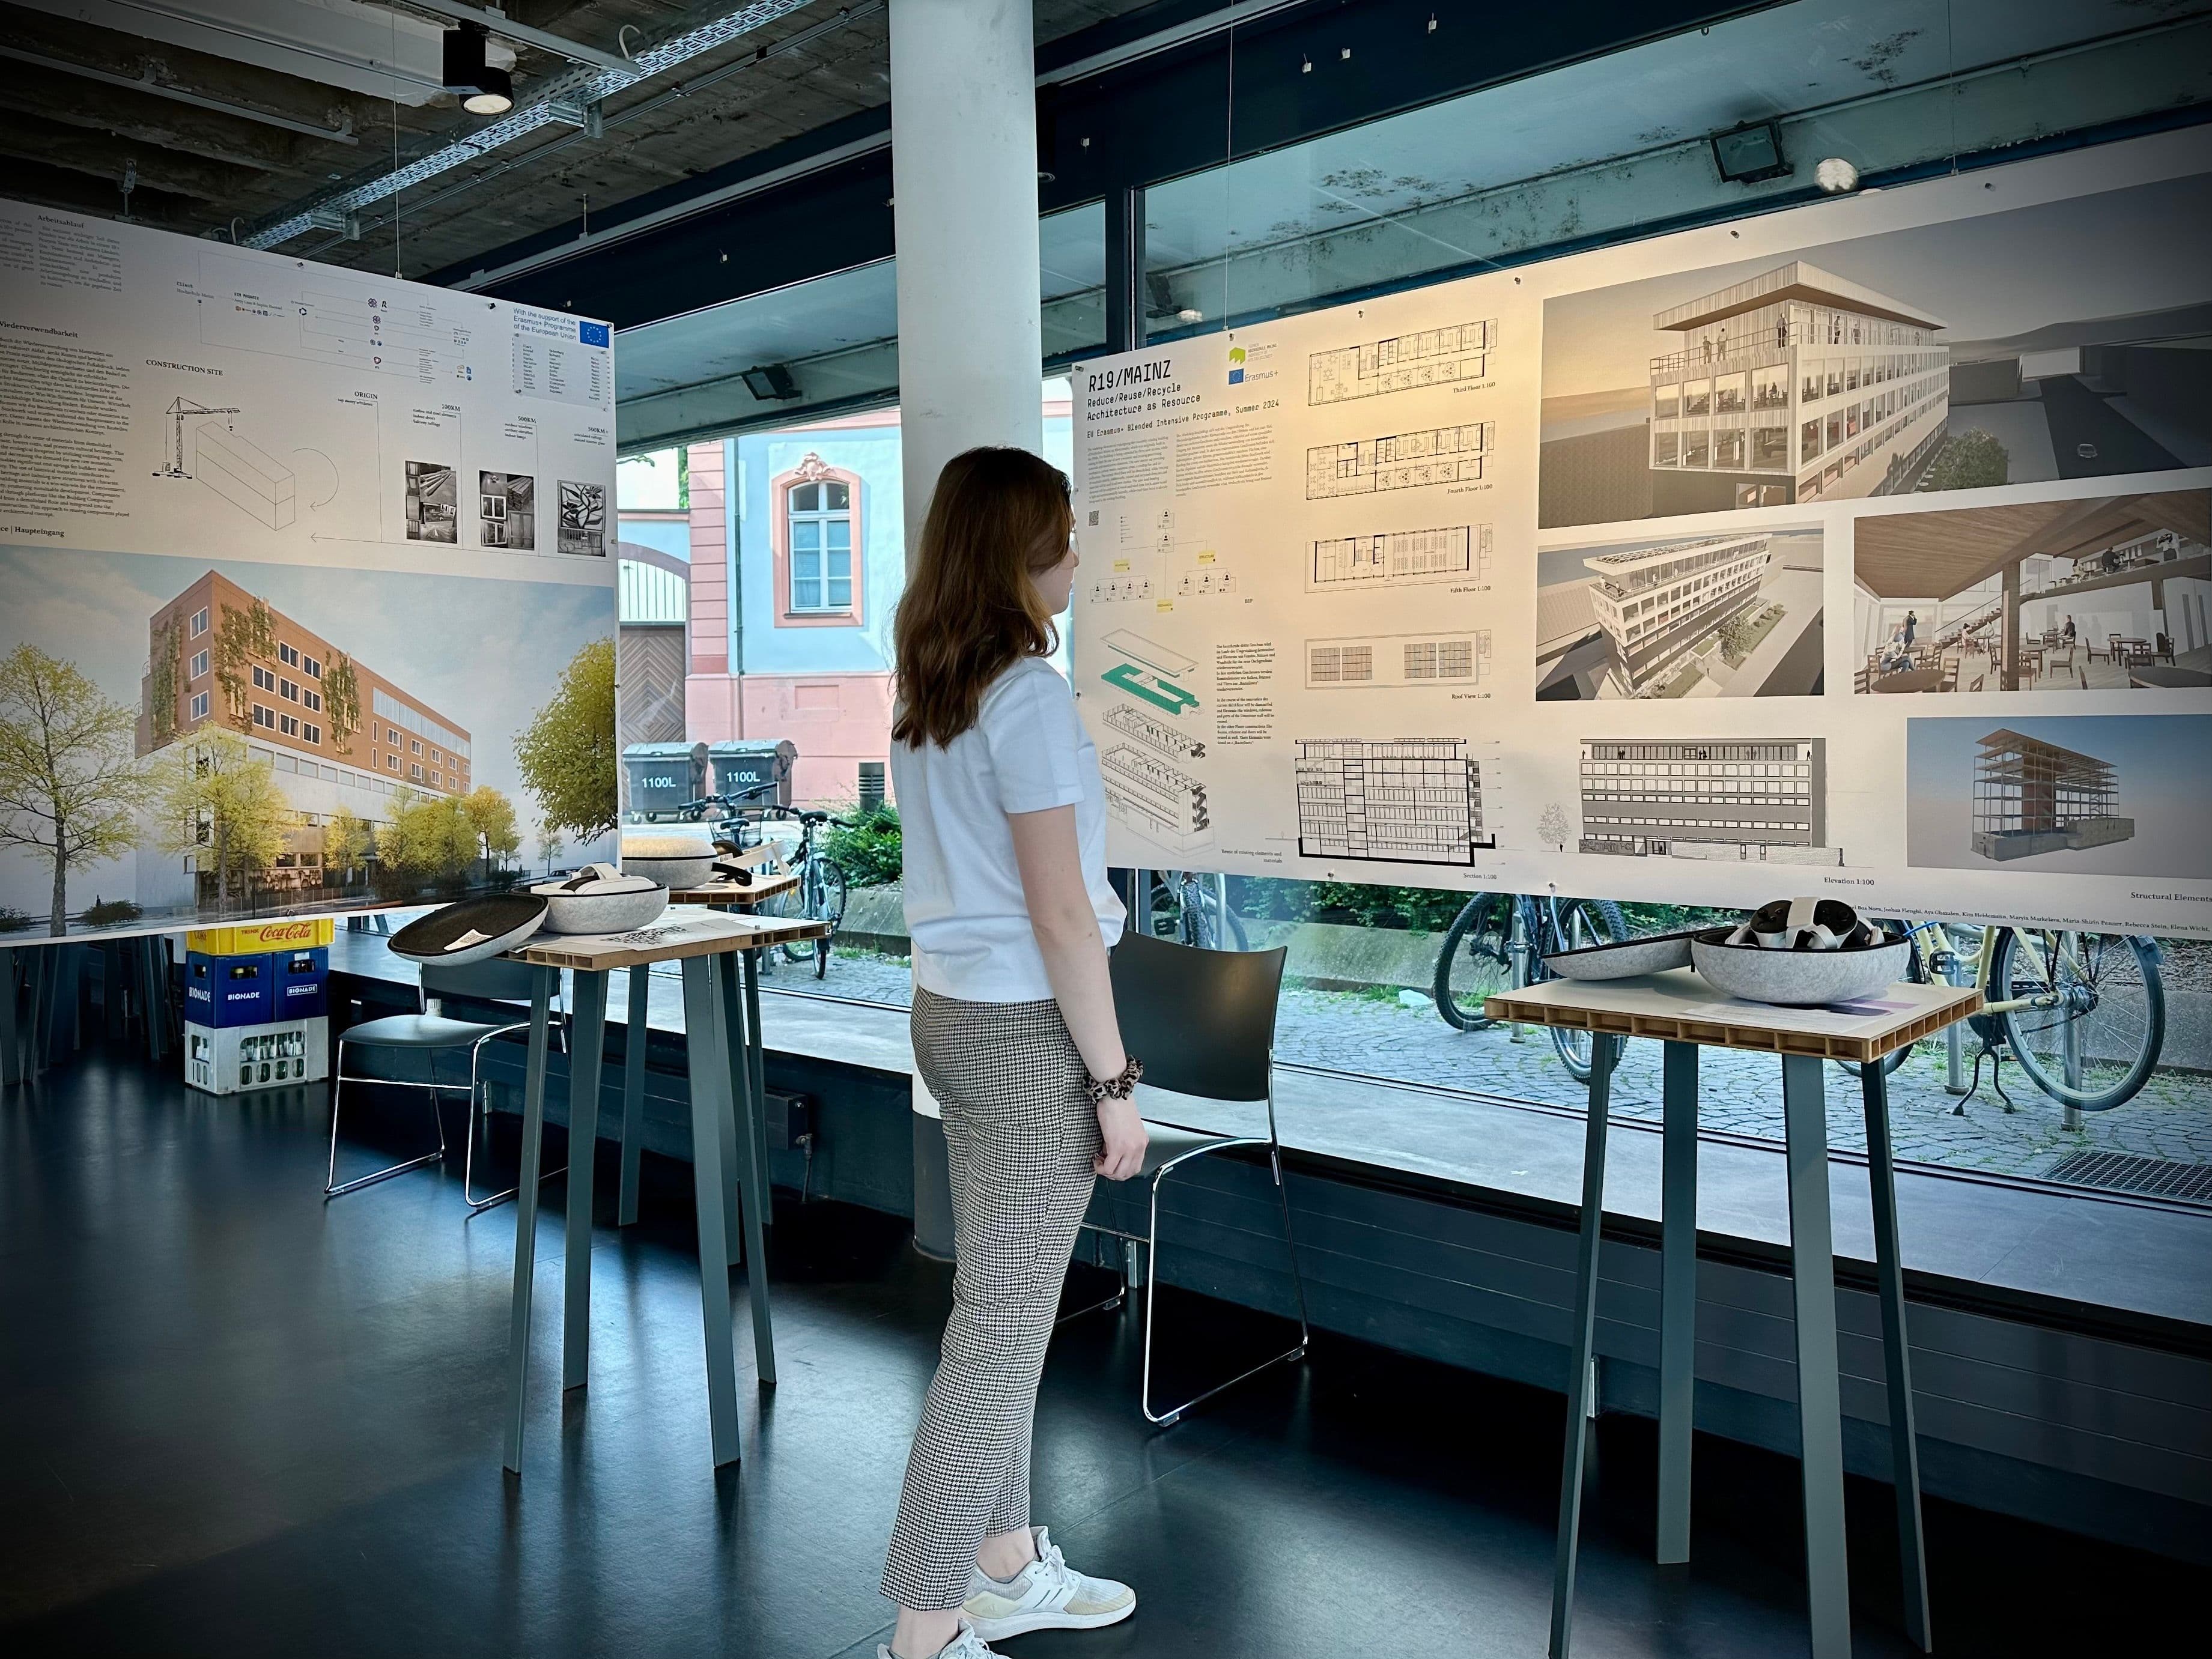 Picture of The results are on display in an exhibition in the LUX Pavilion